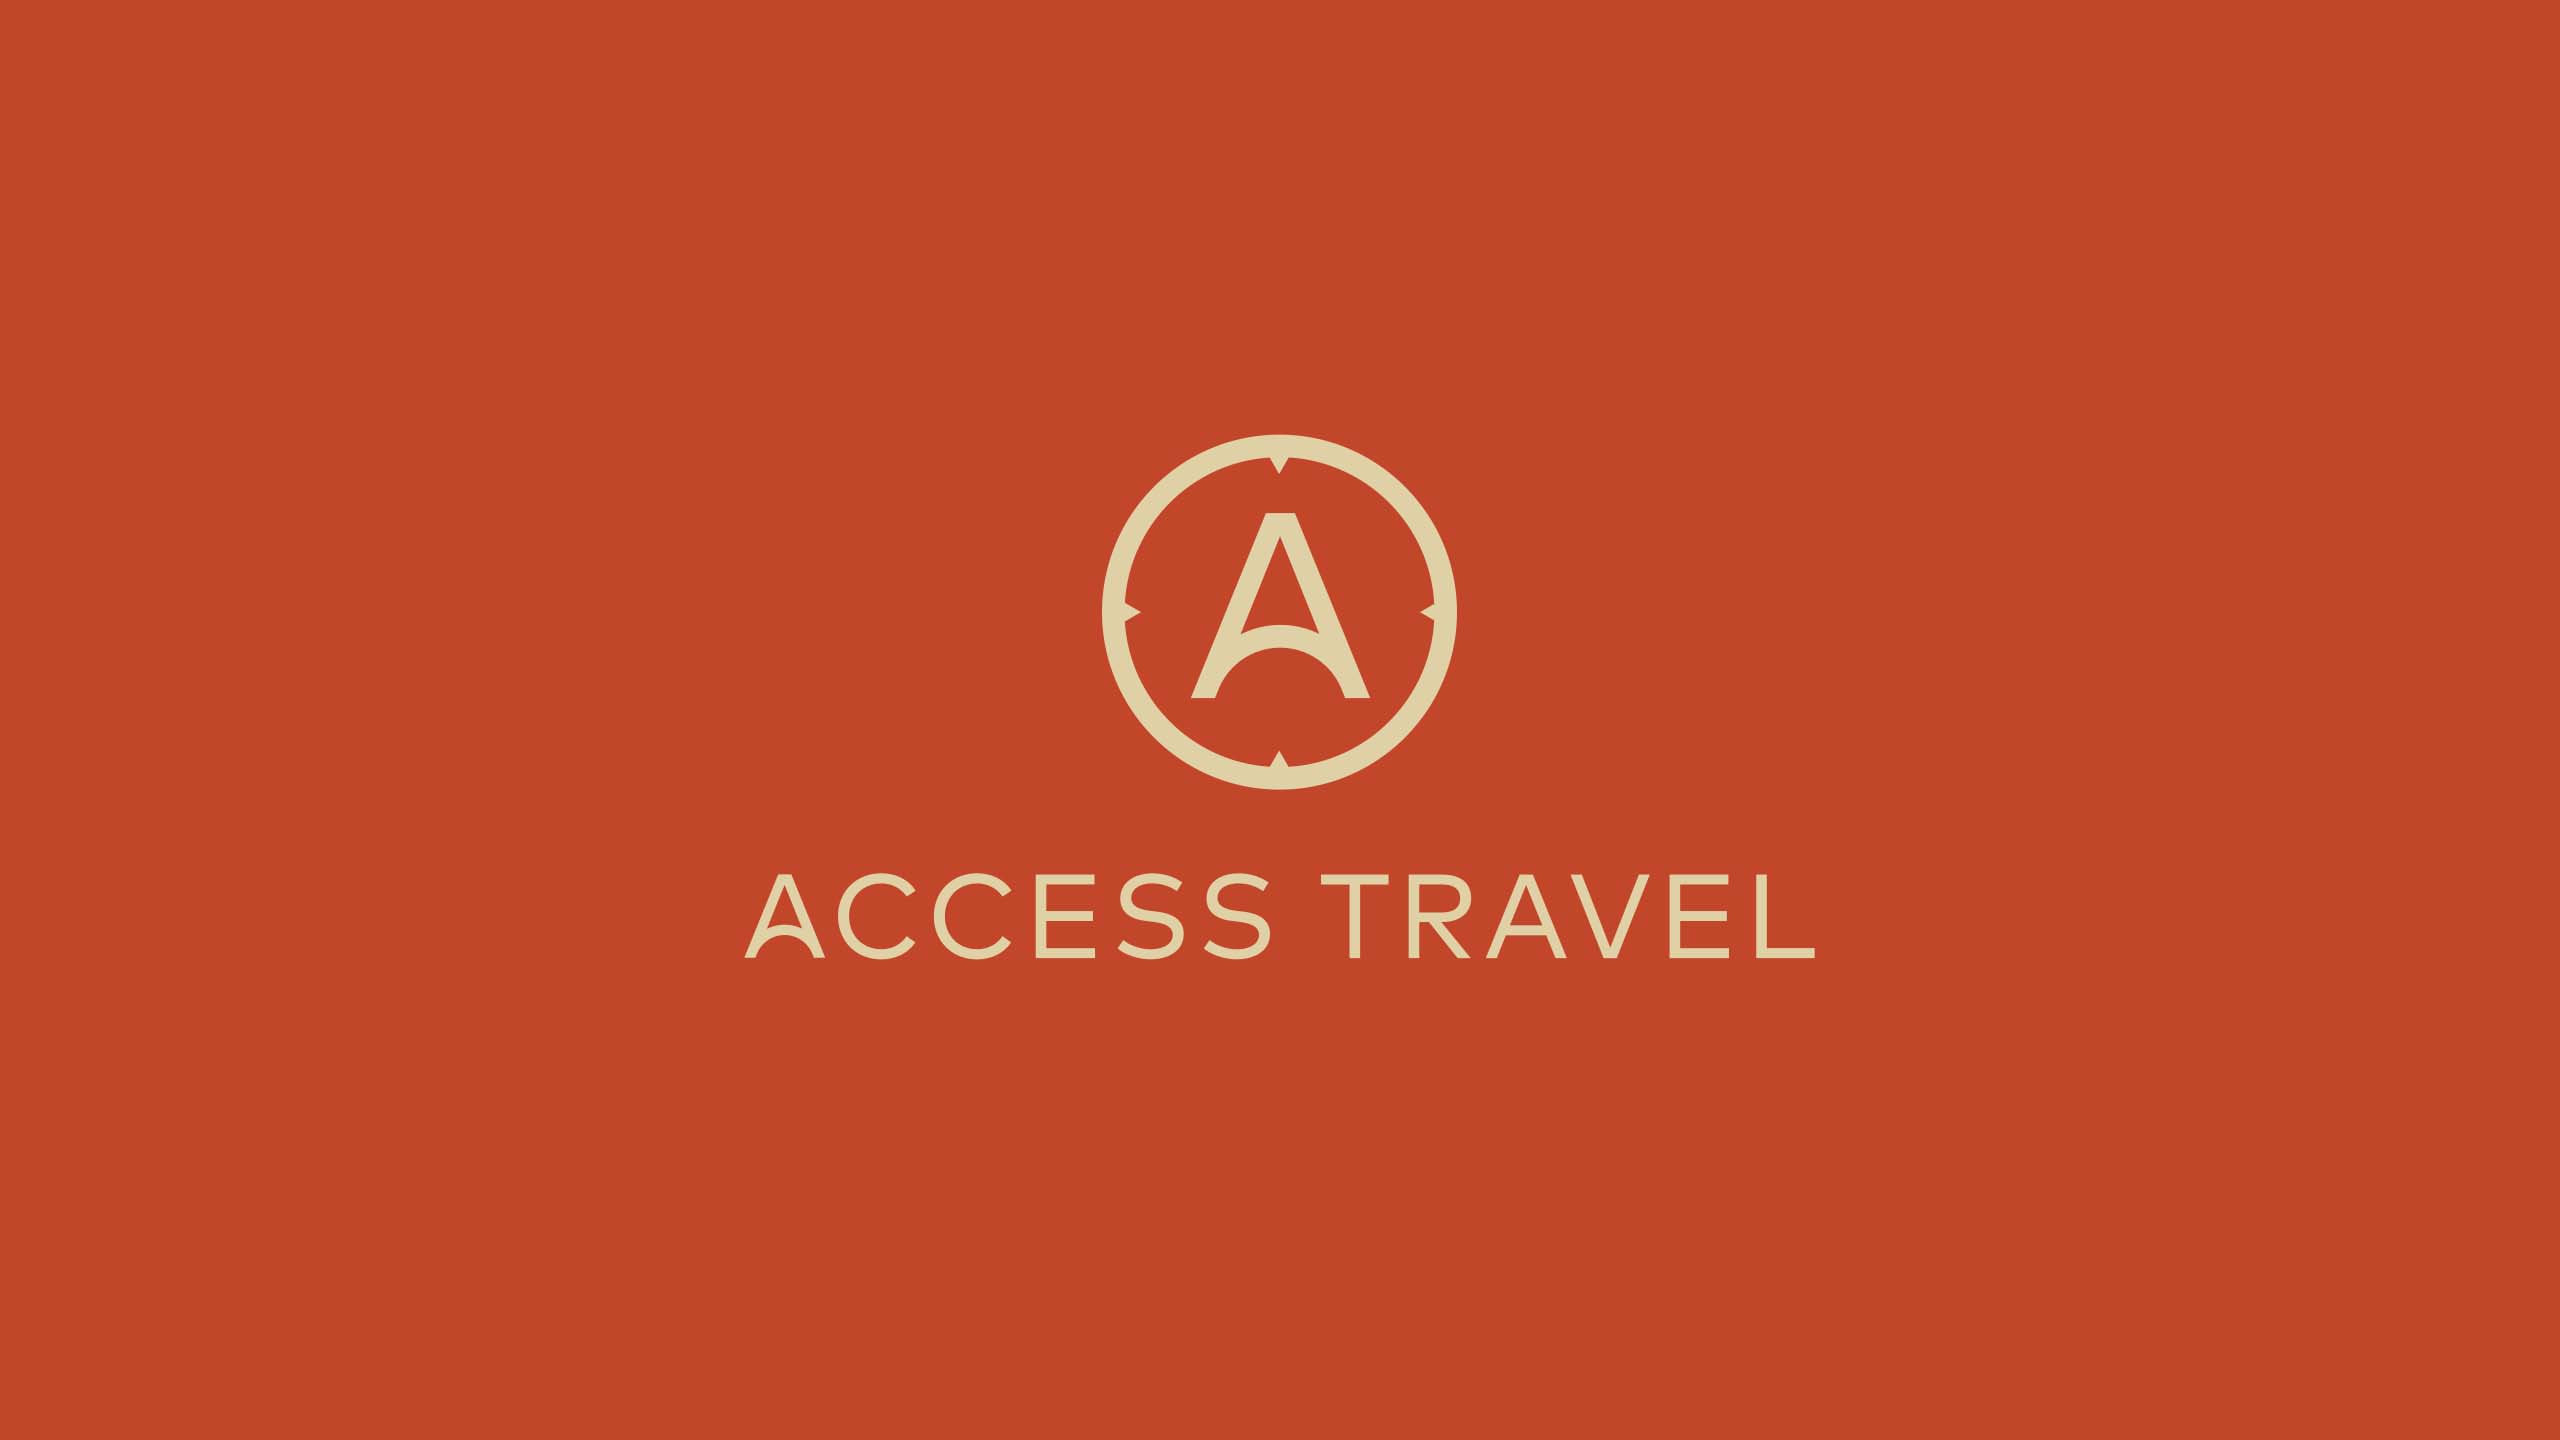 A witty red and beige logo designed for travel brand Access Travel